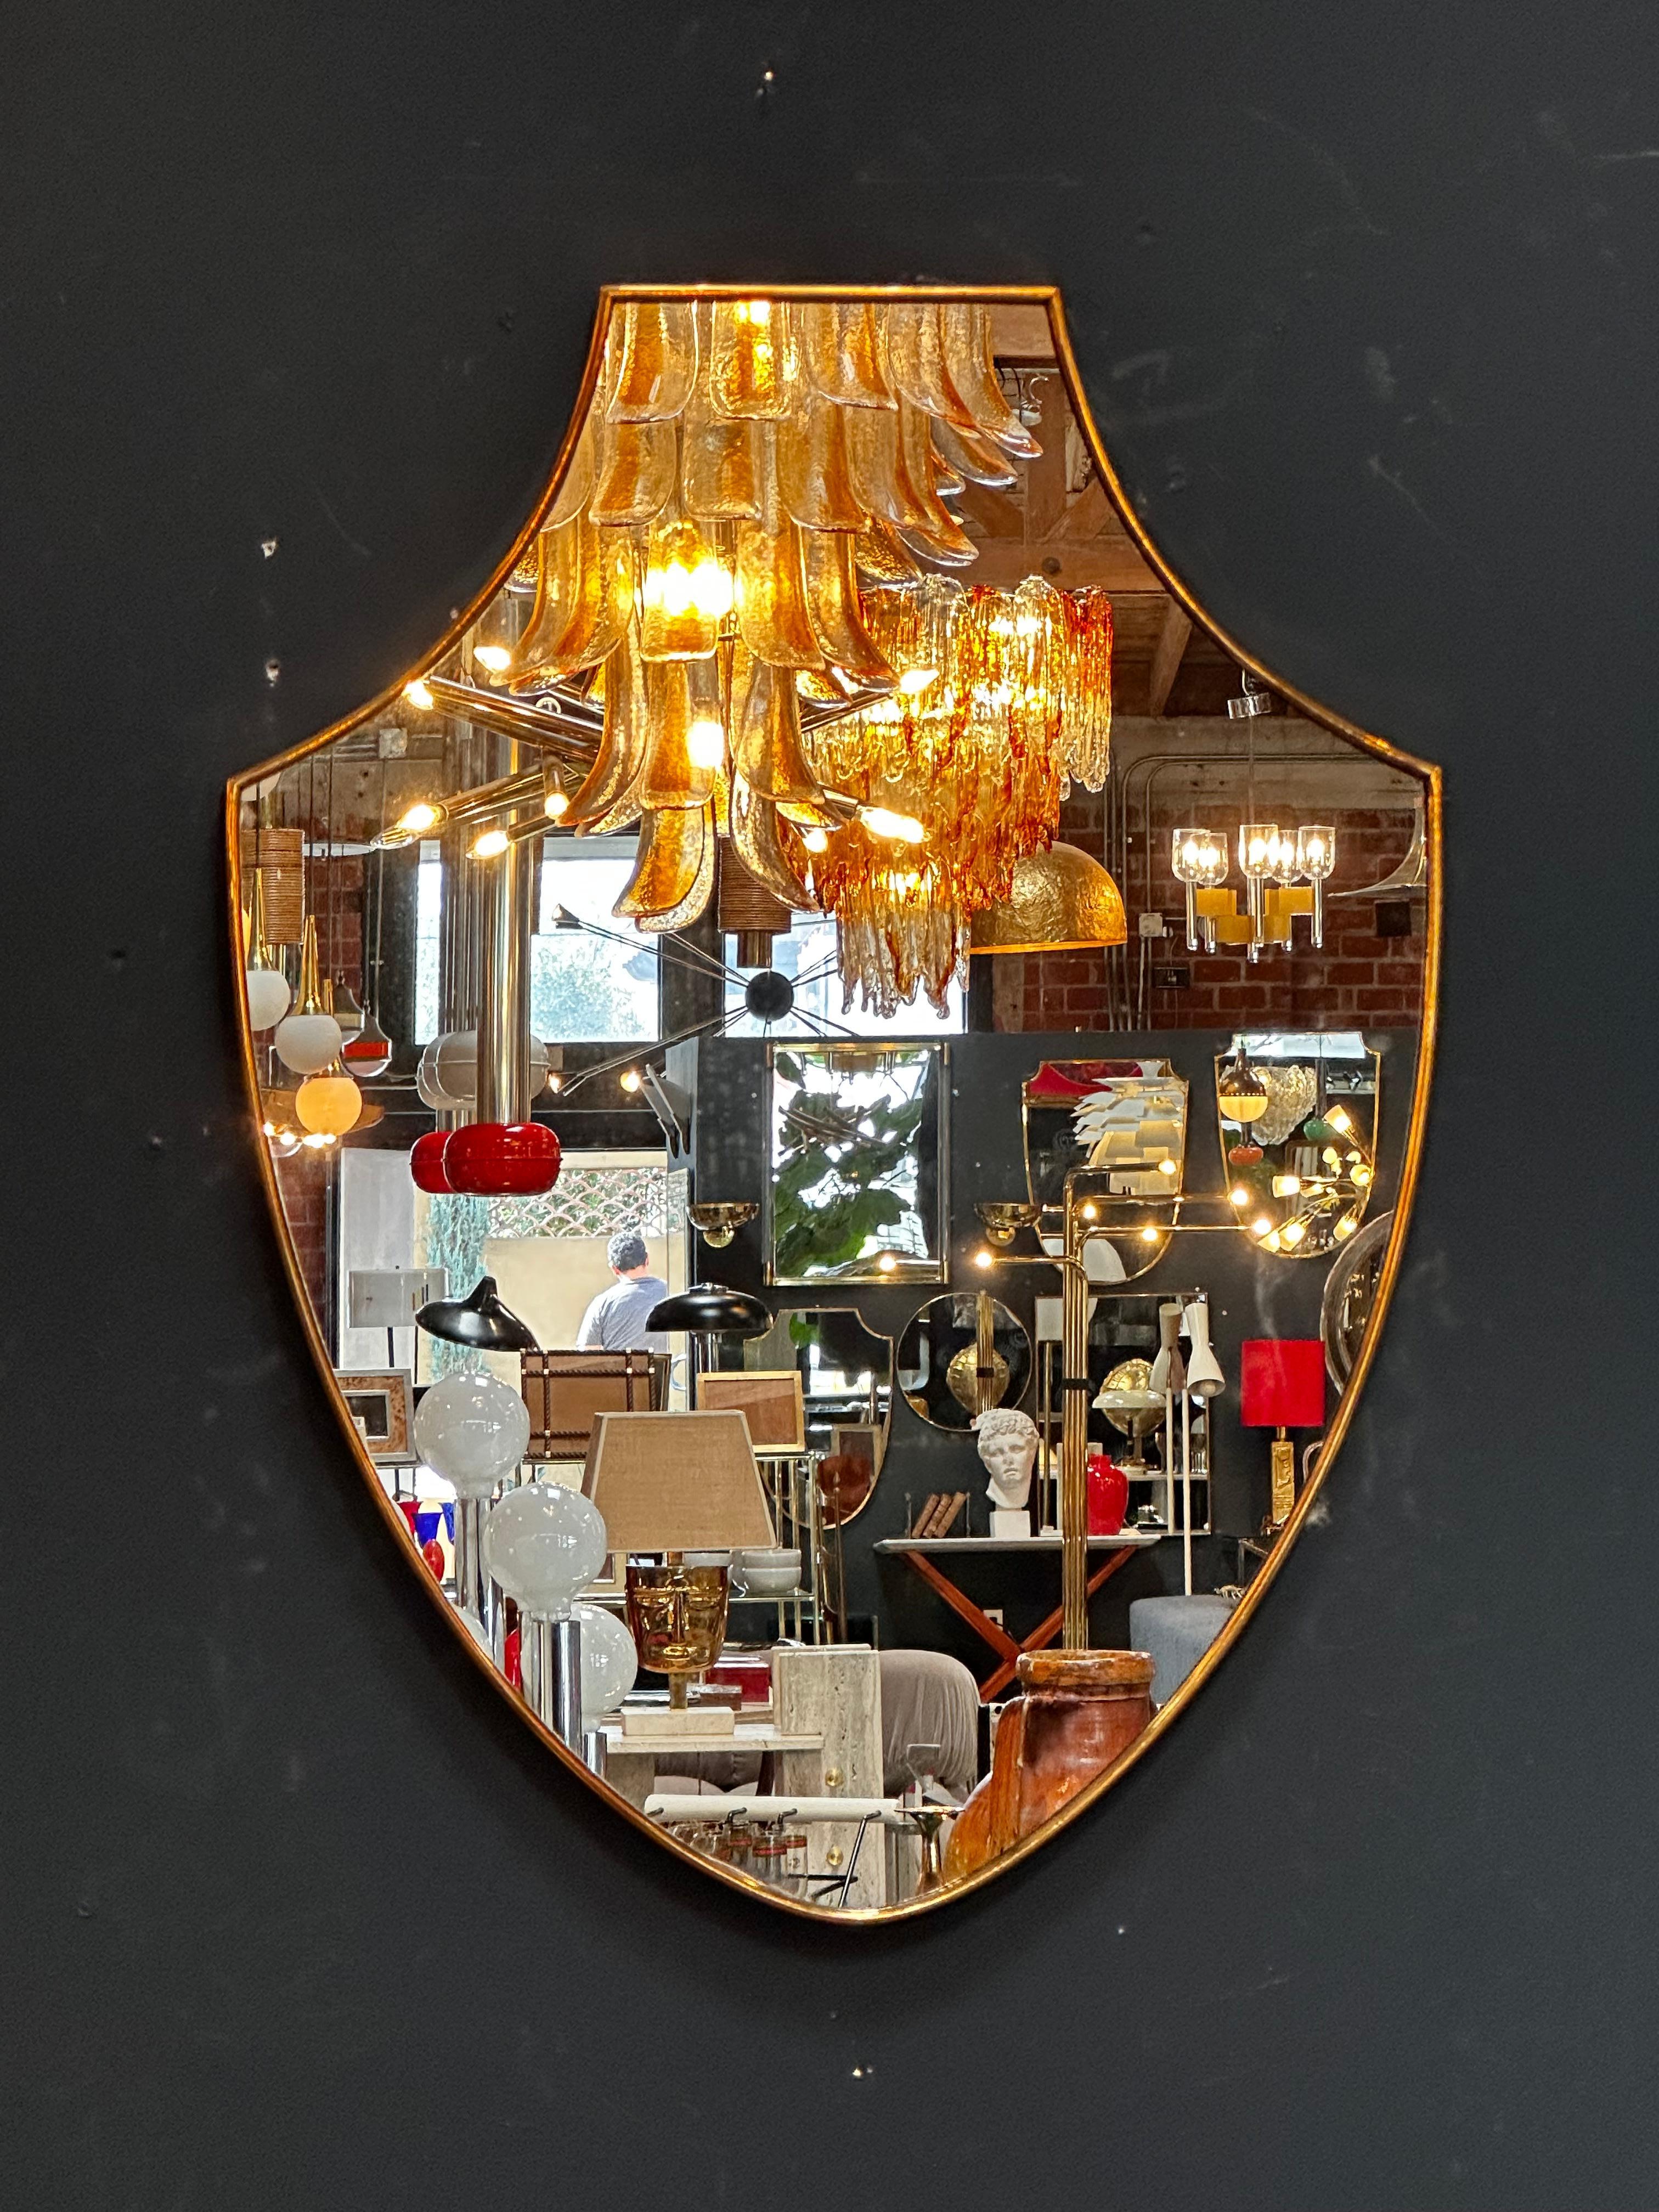 The Vintage Italian 1960s Curvilinear Brass Wall Mirror is a stylish and unique piece showcasing elegant curves in brass.

